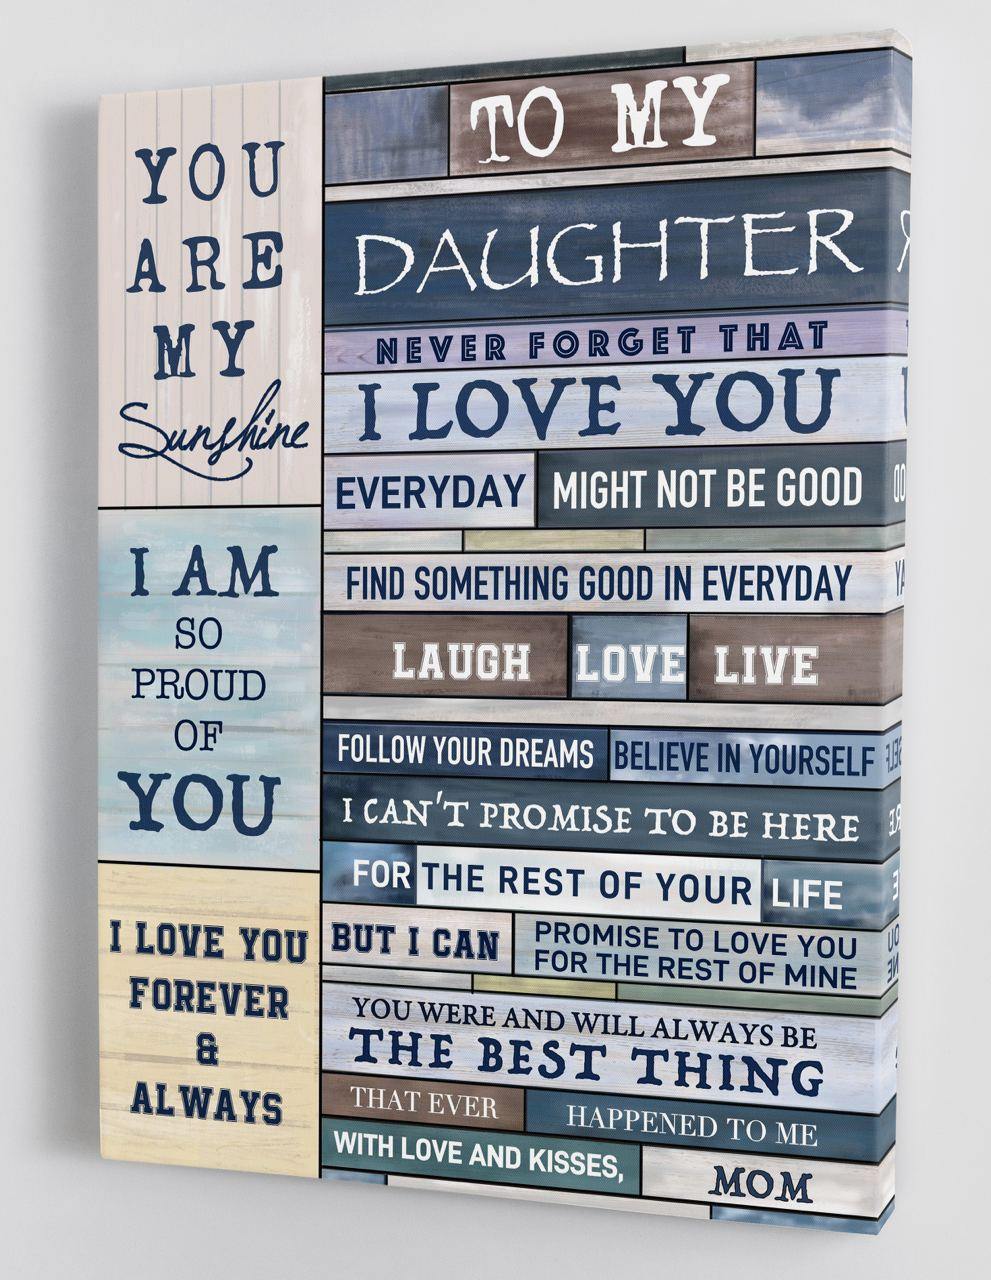 To My Daughter - From Mom - Framed Canvas Gift MD044 - DivesArt LLC